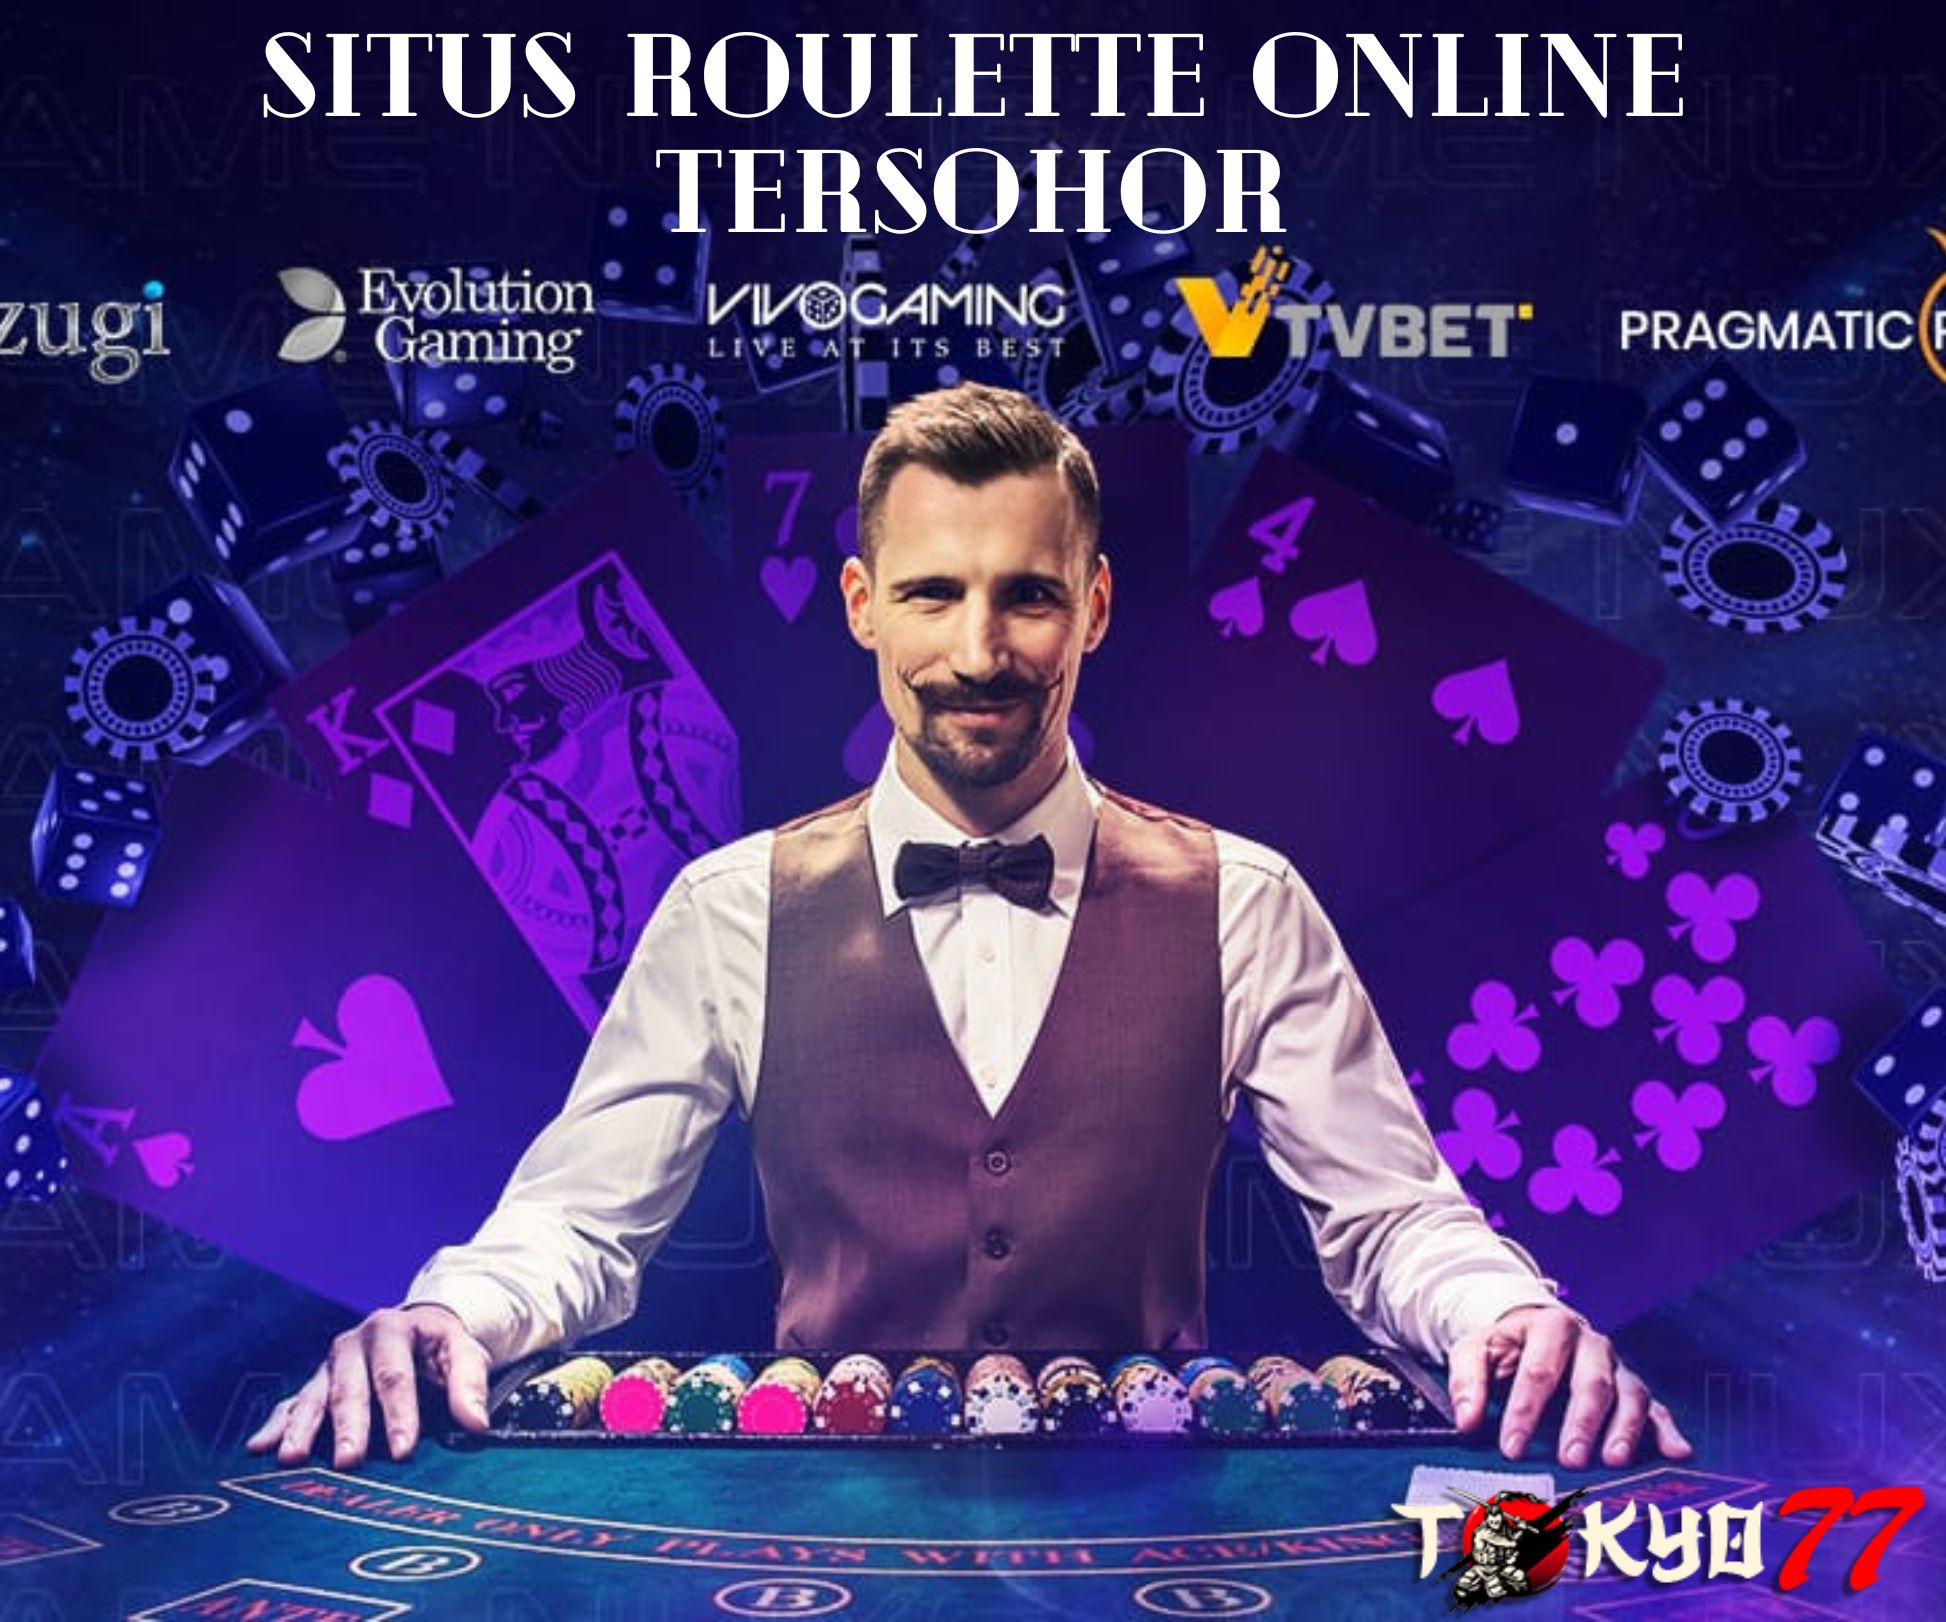 How to win easily playing roulette online